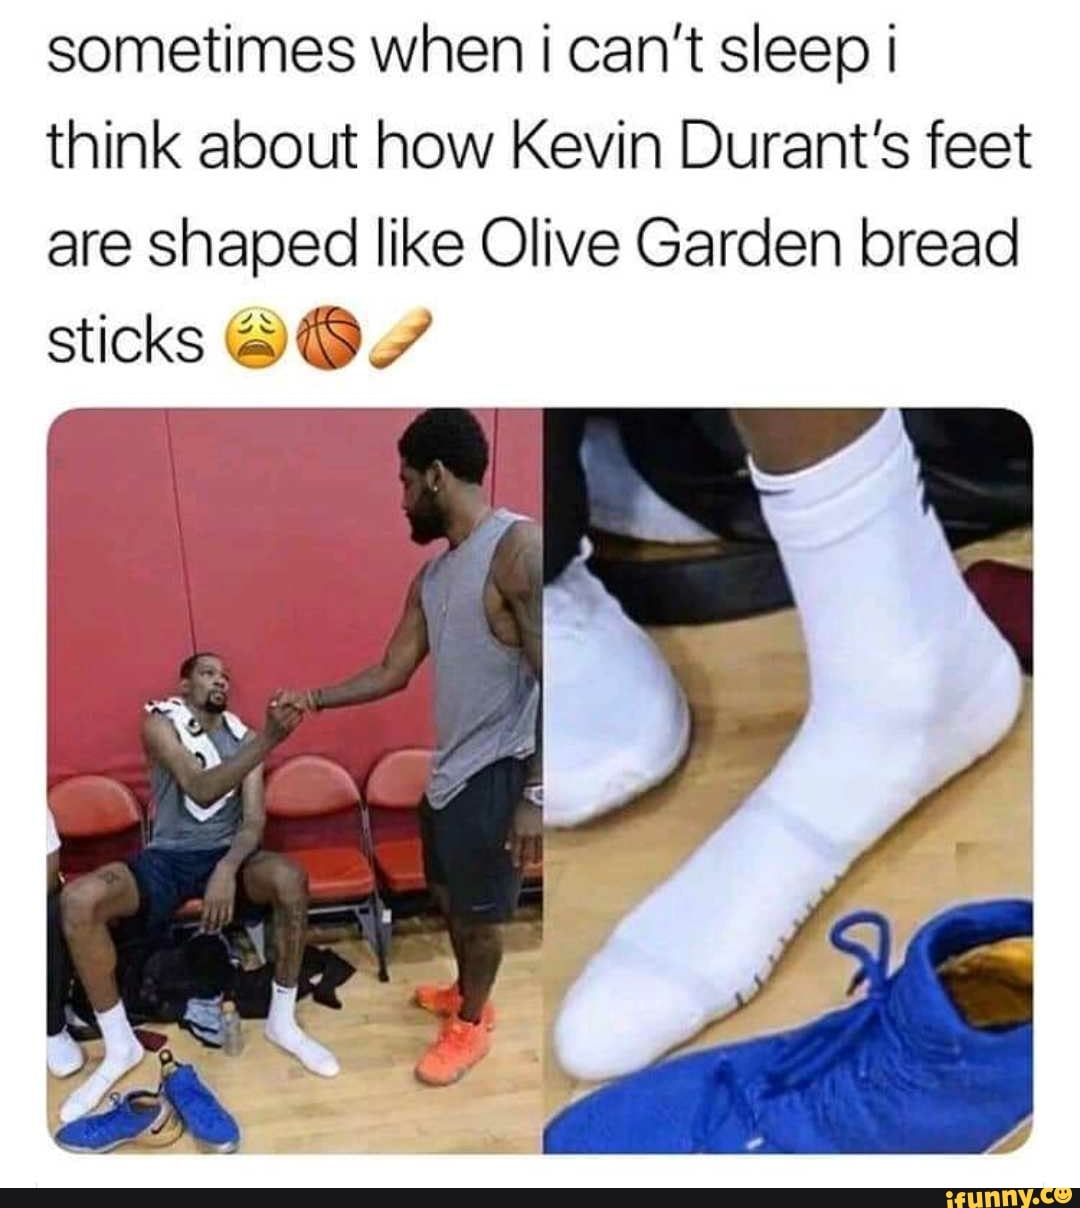 kevin durant's foot